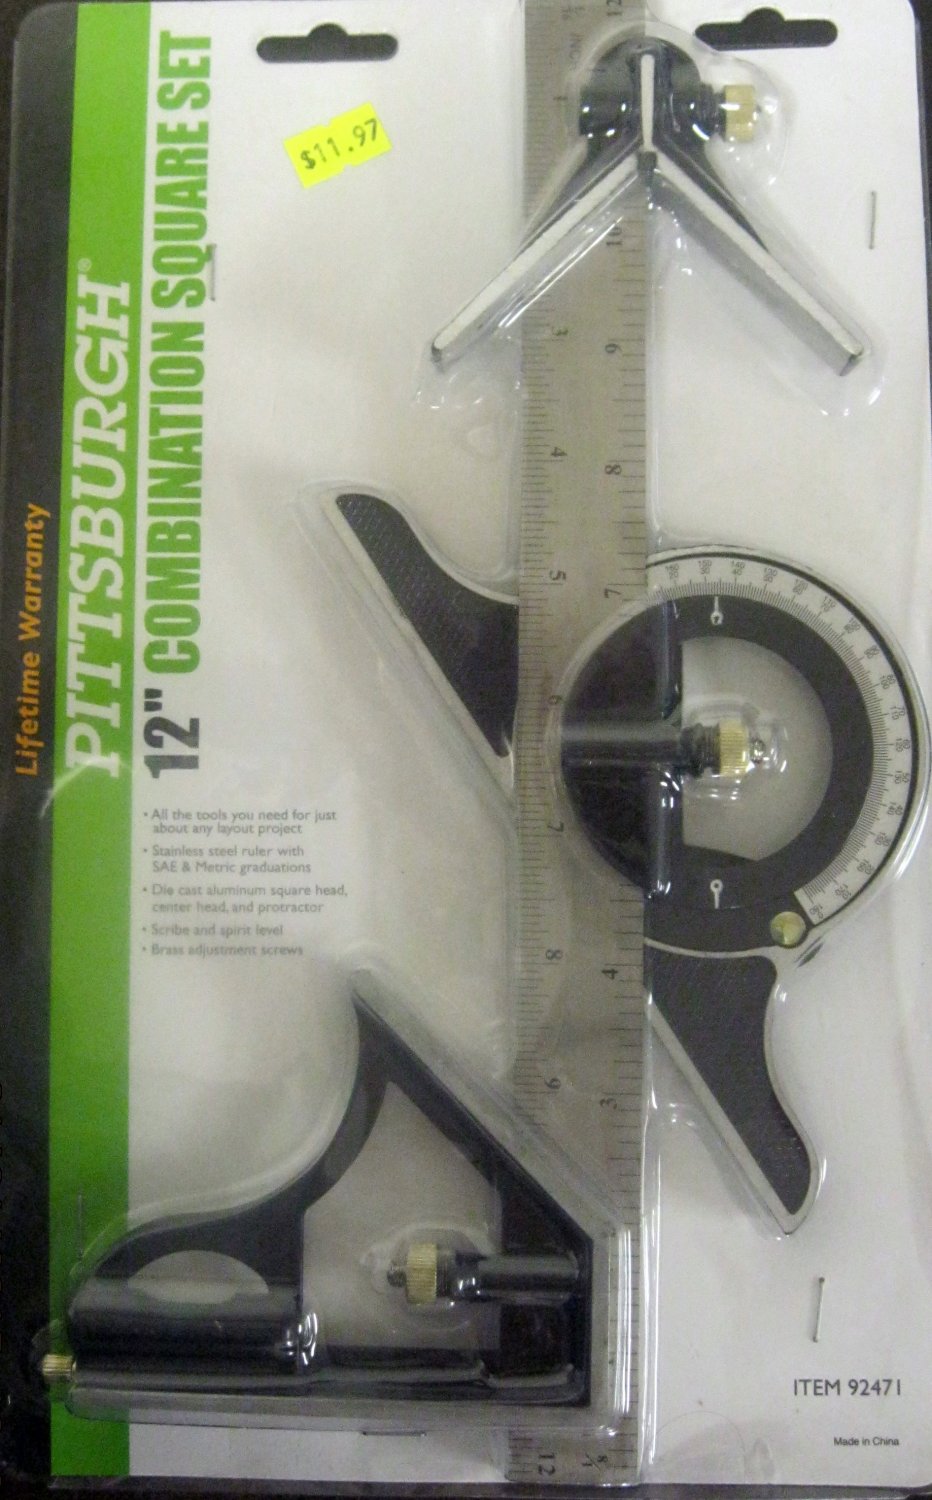 Combination Square Set LIFETIME WARRANTY Metric/SAE Pittsburgh Pro 12 In 